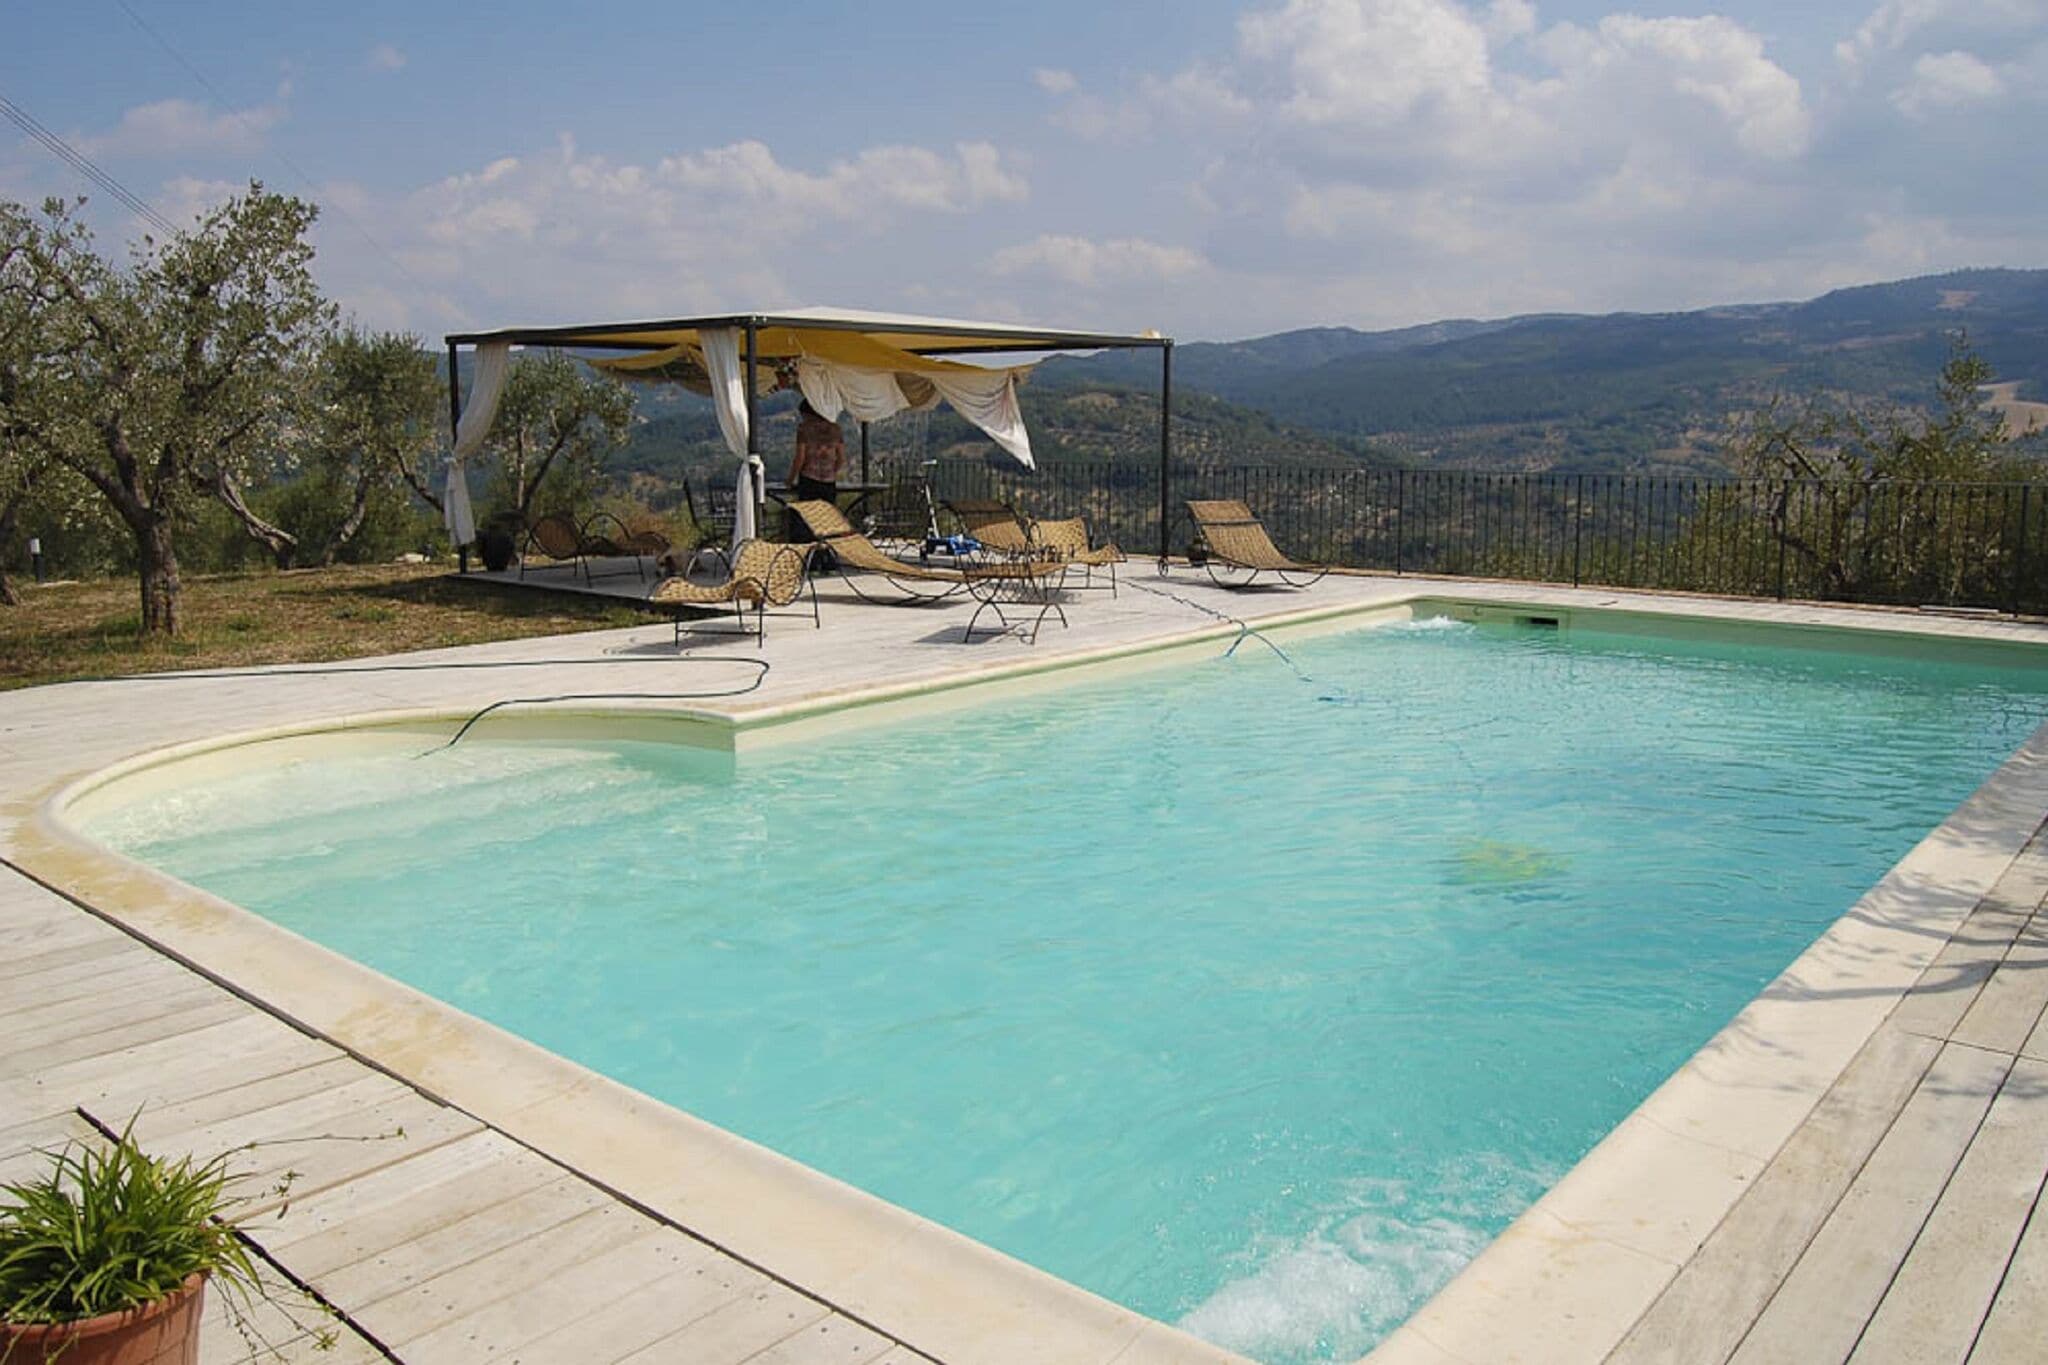 Valley-view holiday home in Seggiano with a sauna